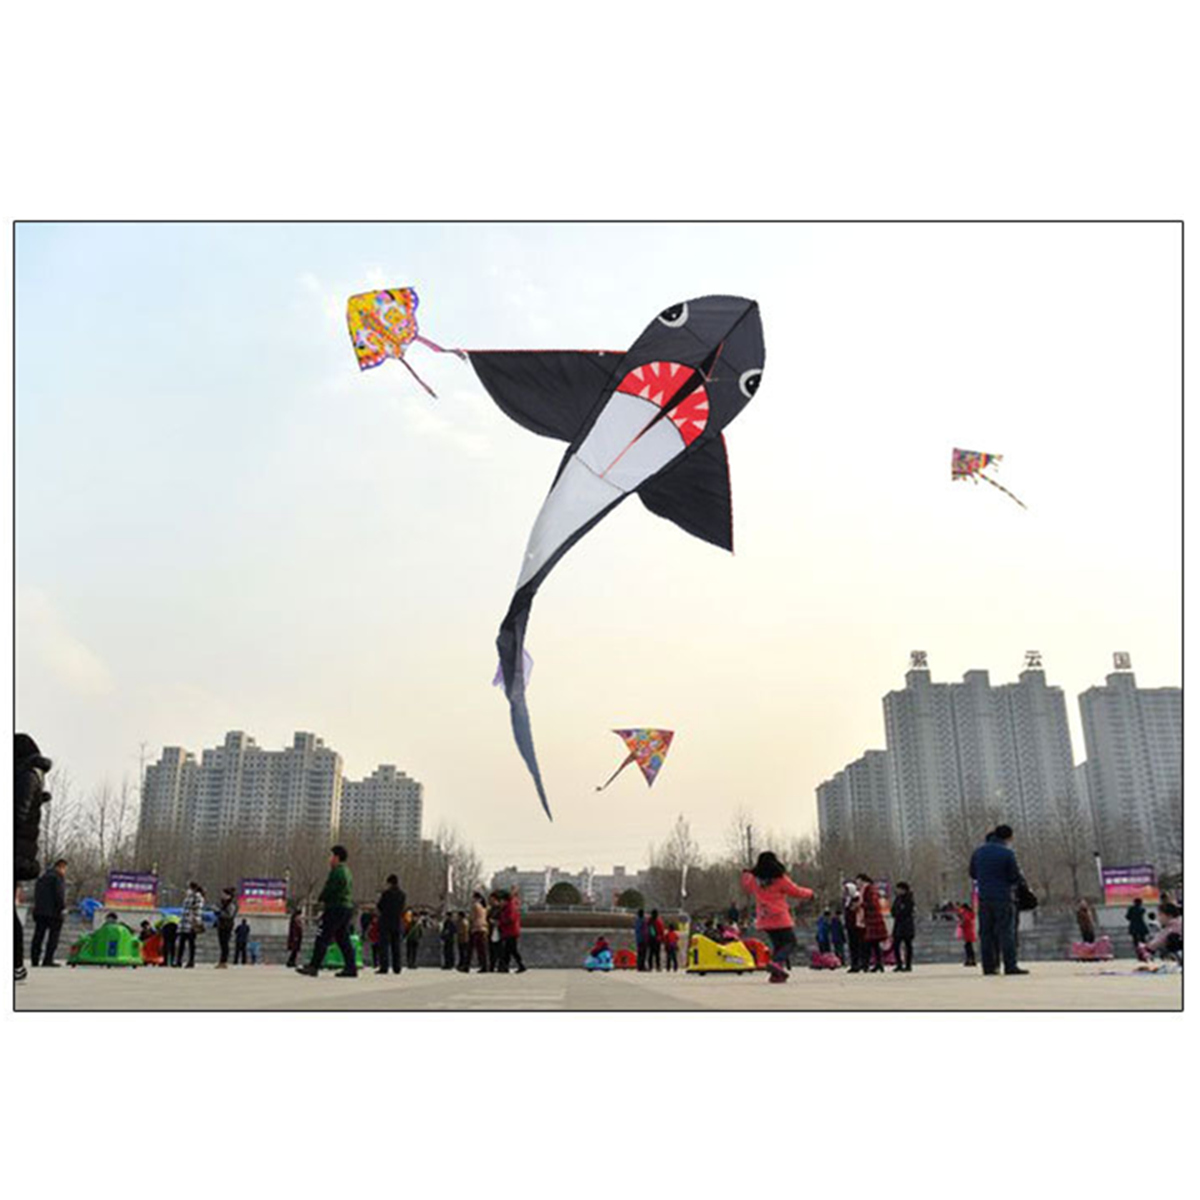 5577-Inches-Big-Size-Shark-Kite-Kid-Outdoor-Play-Toys-Without-Line-Winder-1436719-6